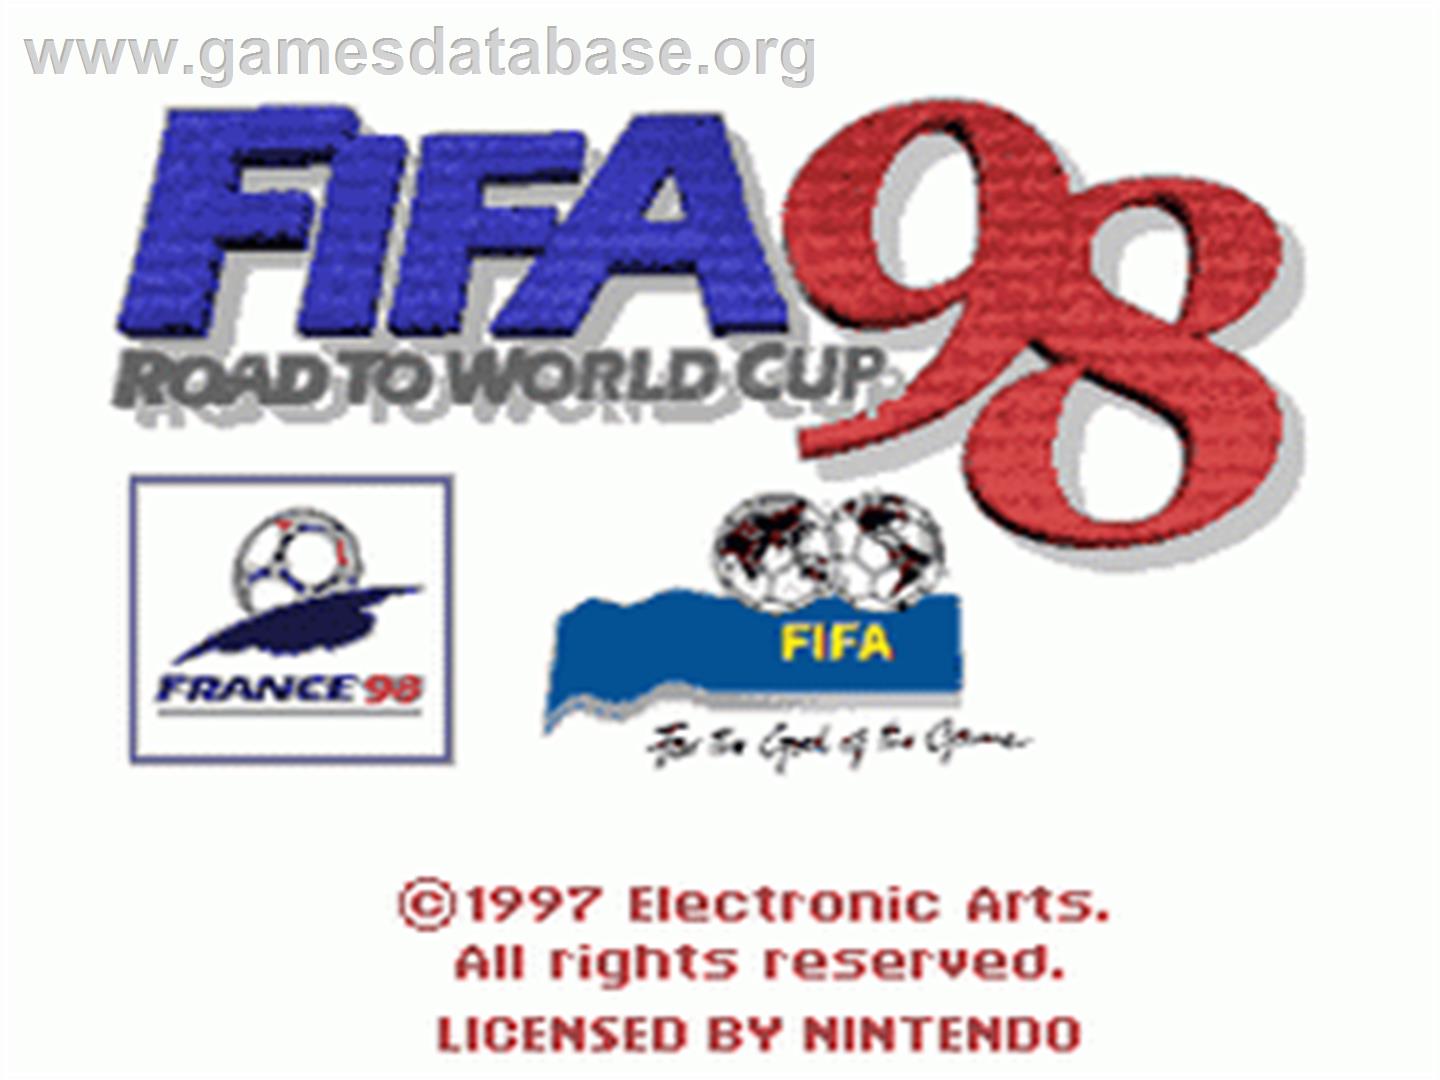 FIFA 98: Road to World Cup - Nintendo SNES - Artwork - Title Screen